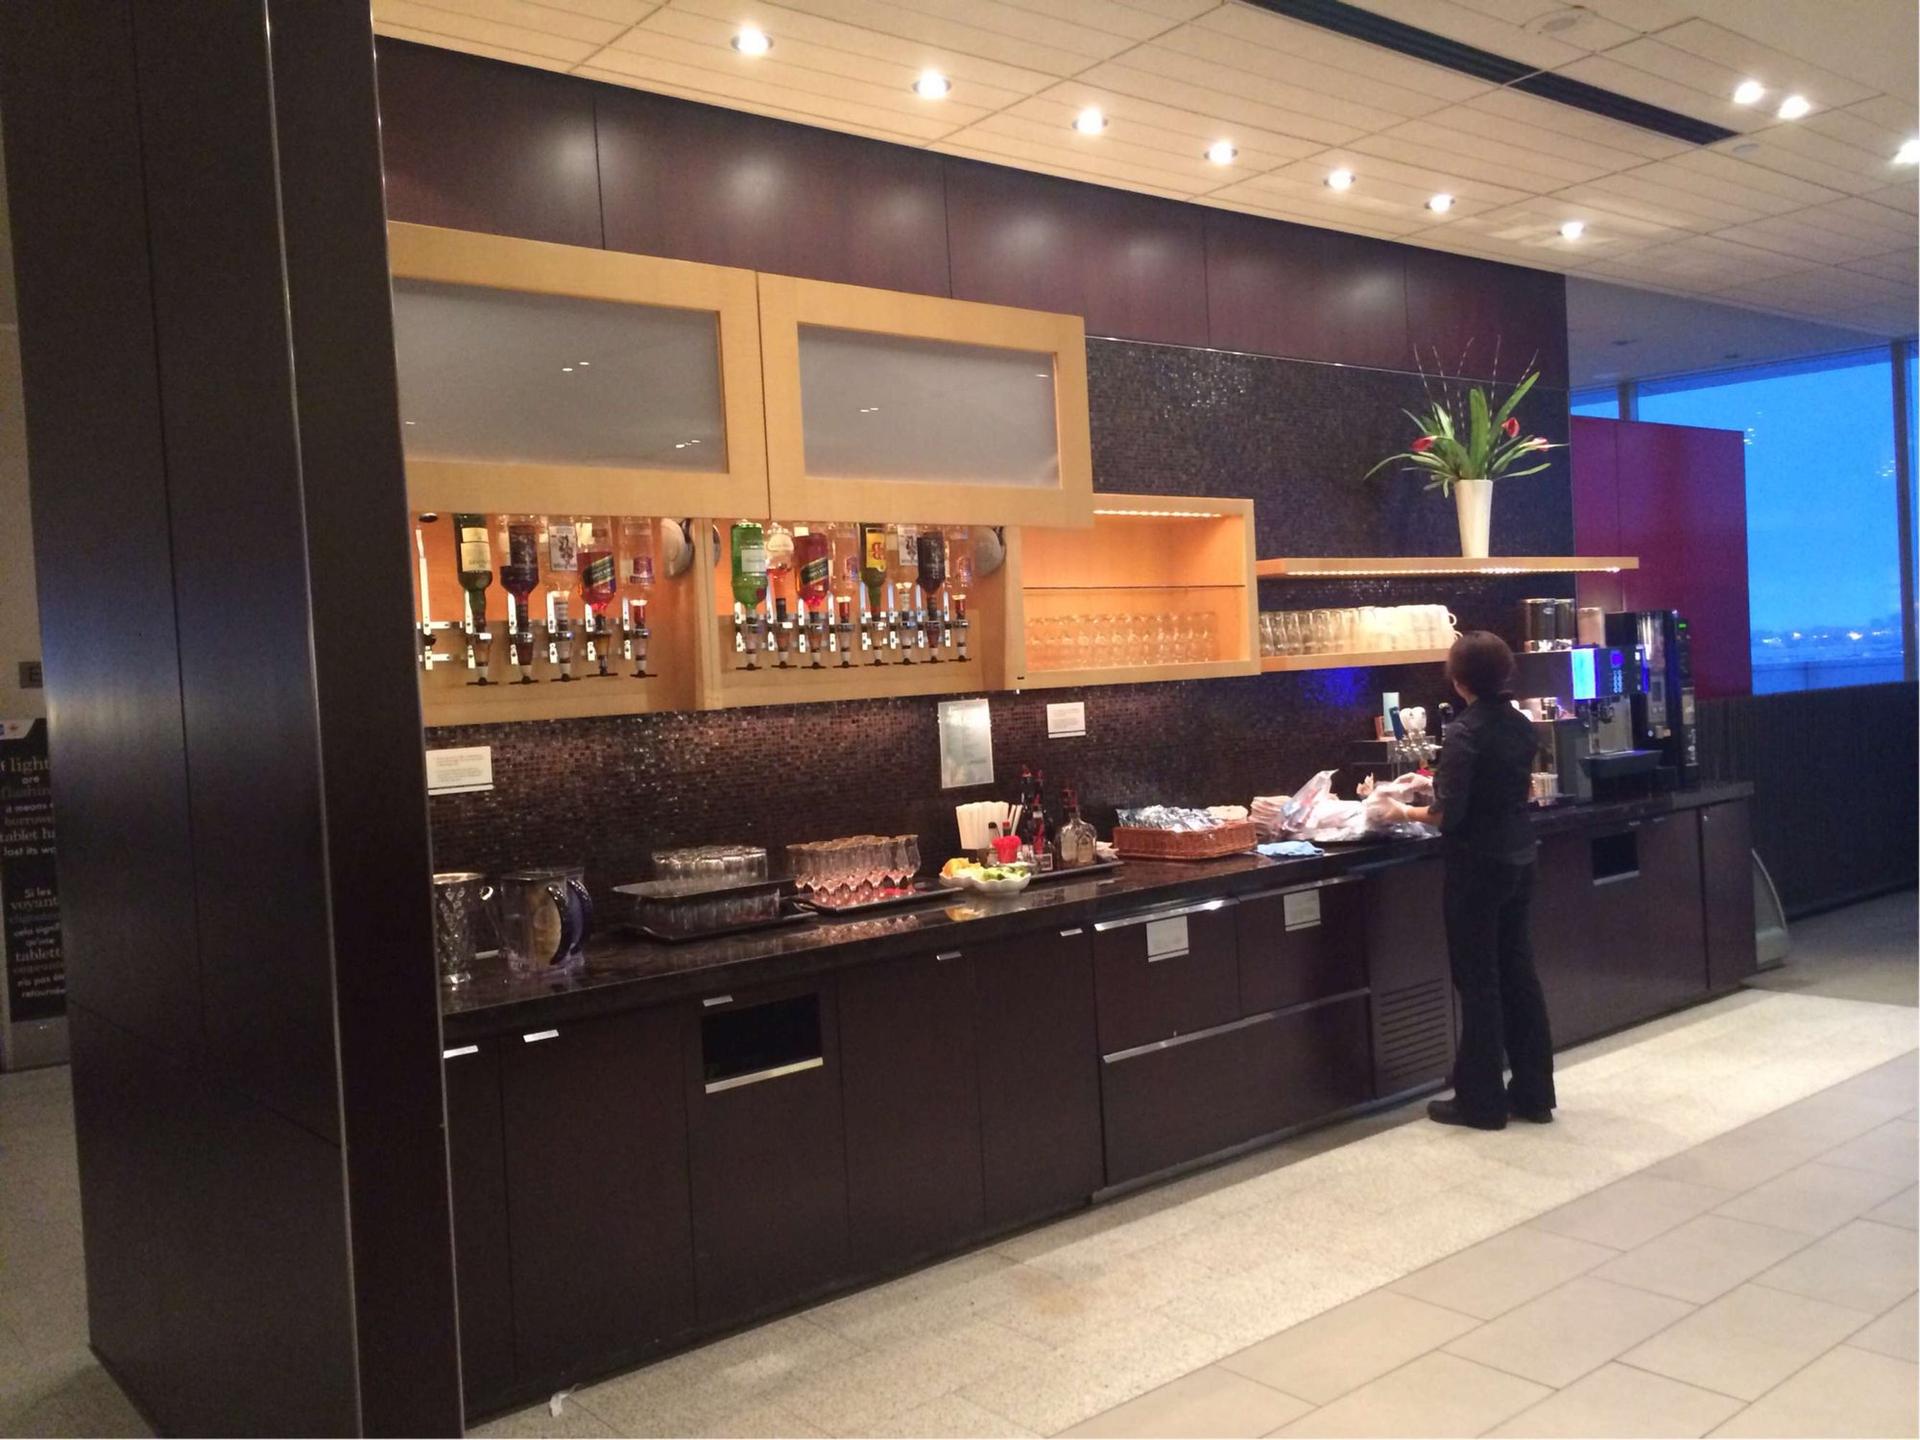 Air Canada Maple Leaf Lounge image 1 of 21